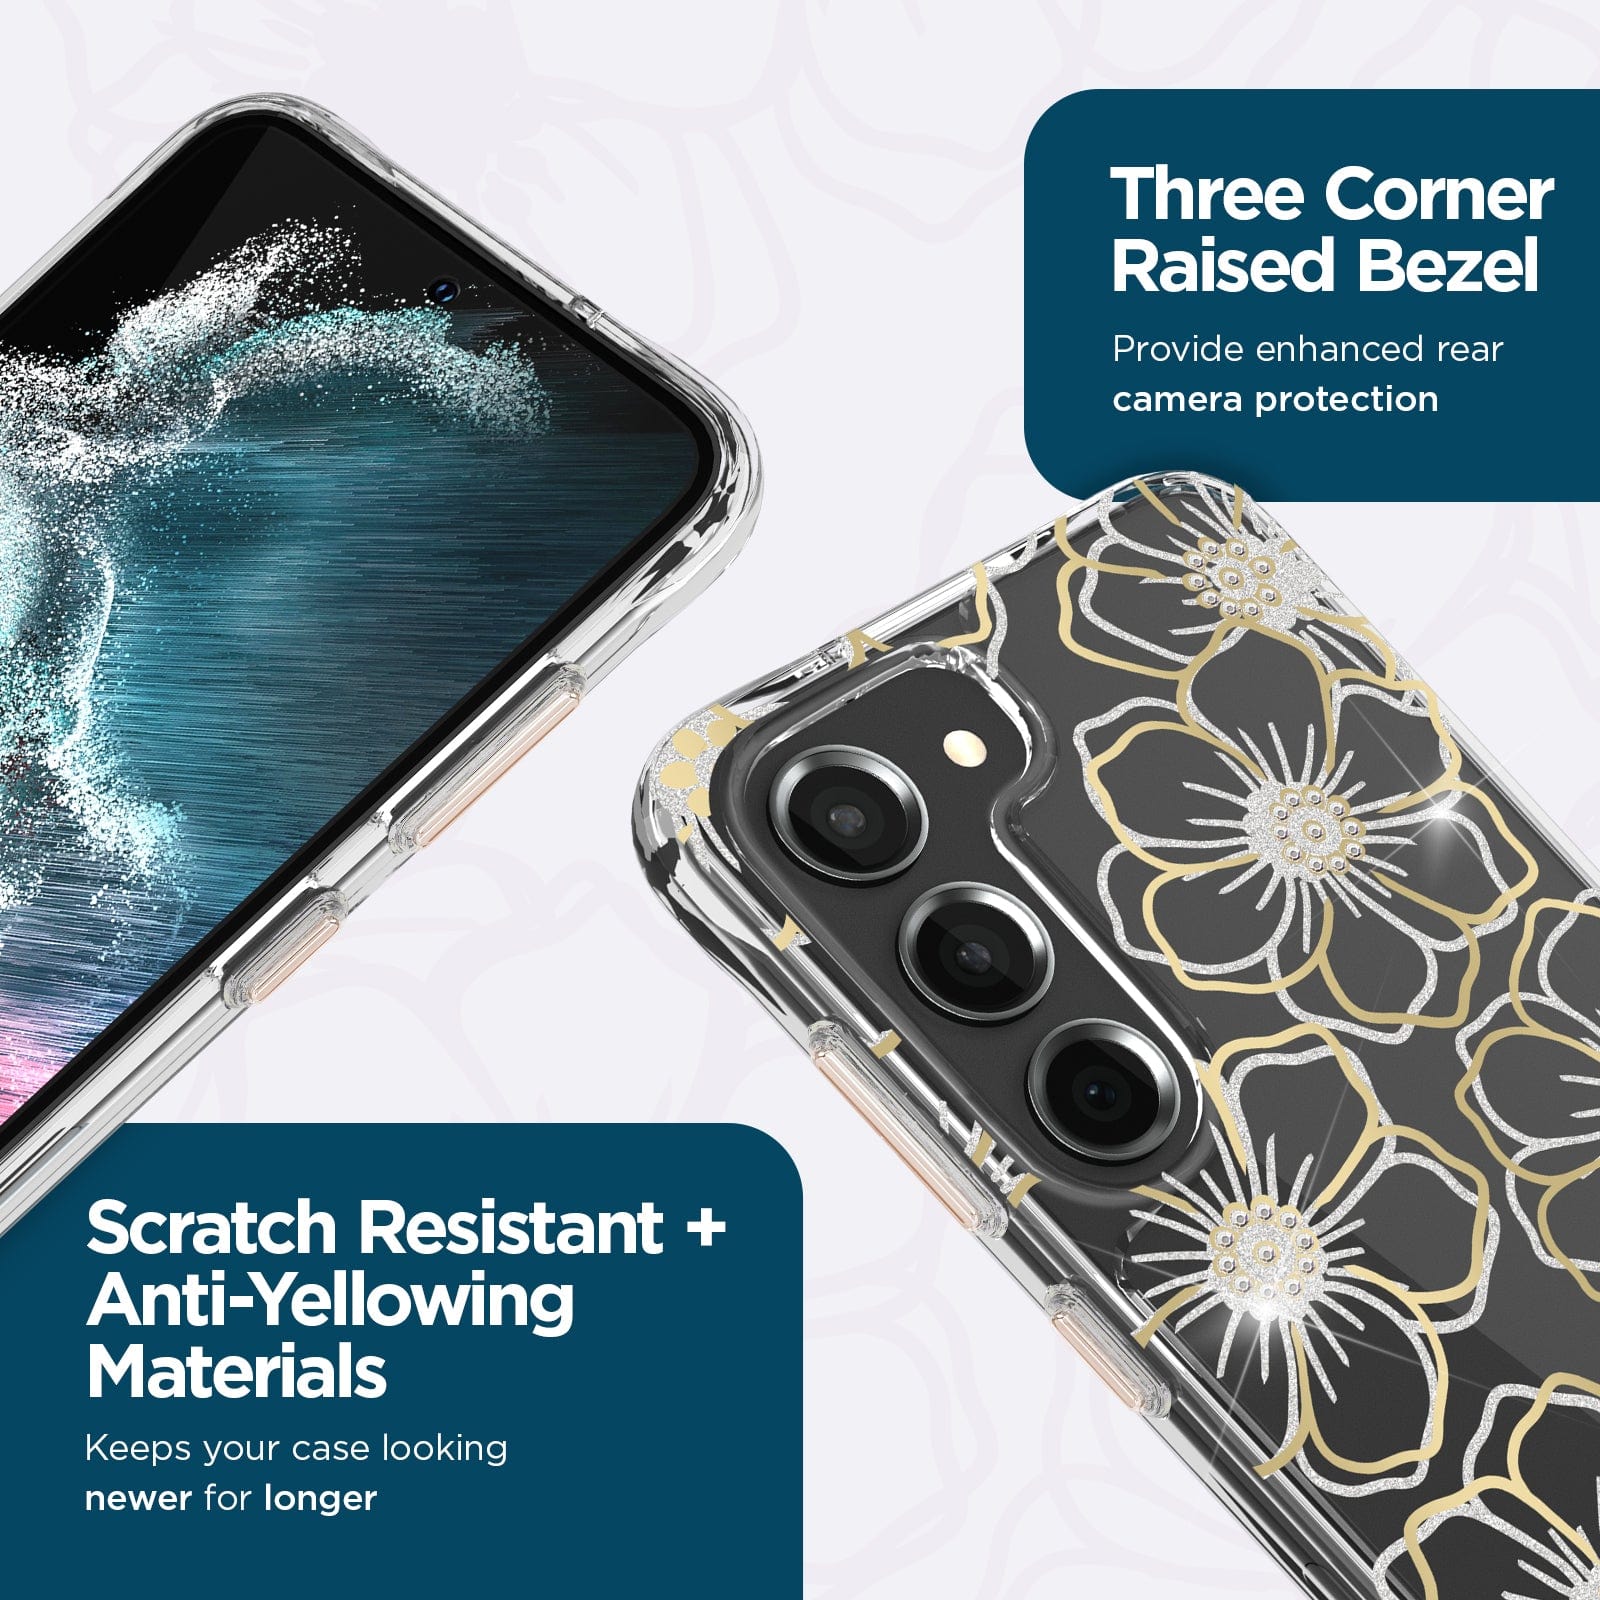 THREE CORNER RAISED BEZEL. PROVIDE ENHANCED REAR CAMERA PROTECTION. SCRATCH RESISTANT + ANTI-YELLOWING MATERIALS. KEEPS YOUR CASE LOOKING NEWER FOR LONGER. 